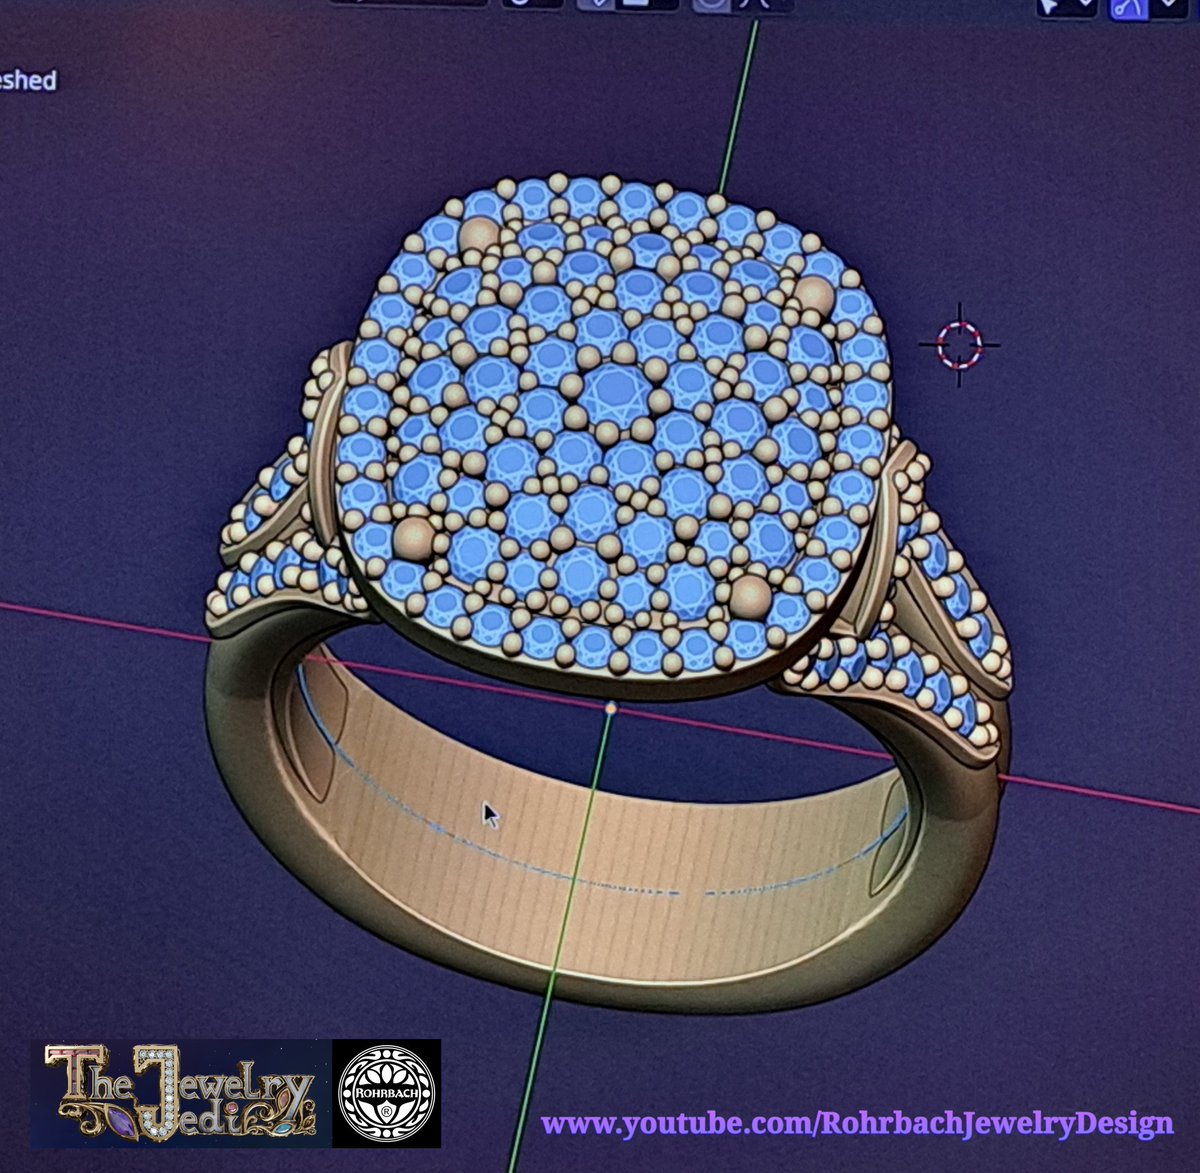 Some designs are exclusive this is all I can show

Rohrbach
Design, modeling, rendering

youtube.com/RohrbachJewelr…

#3djewelrydesign #3djewelry #3dmodeling #jewelryrender #jewelryrendering #fashion #style #jewelryfashion #diamonds #goldring #fashionring #goldjewelry #womanring #b3d